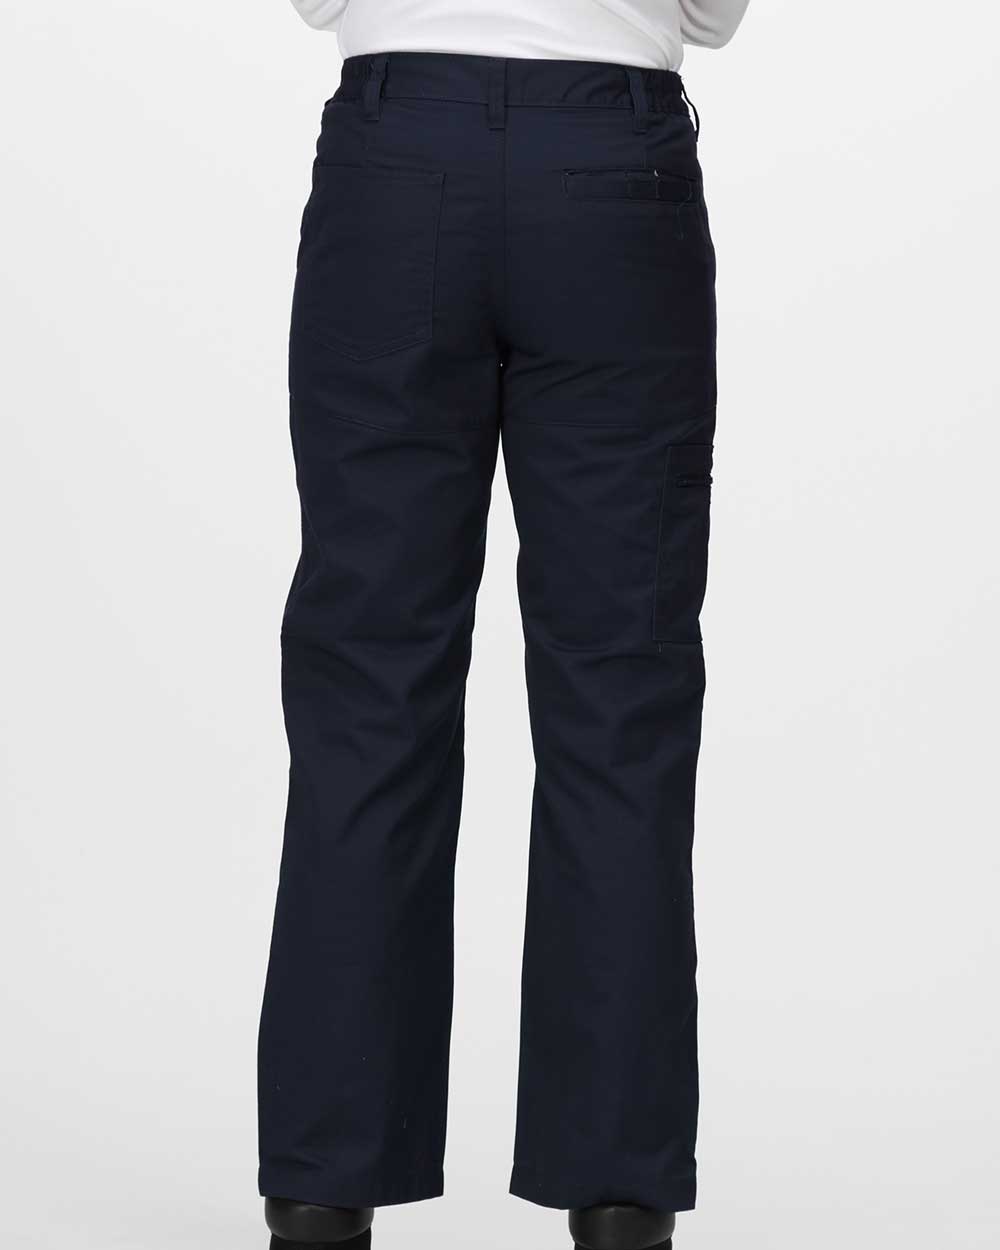 Regatta Womens Pro Action Trousers in Navy 